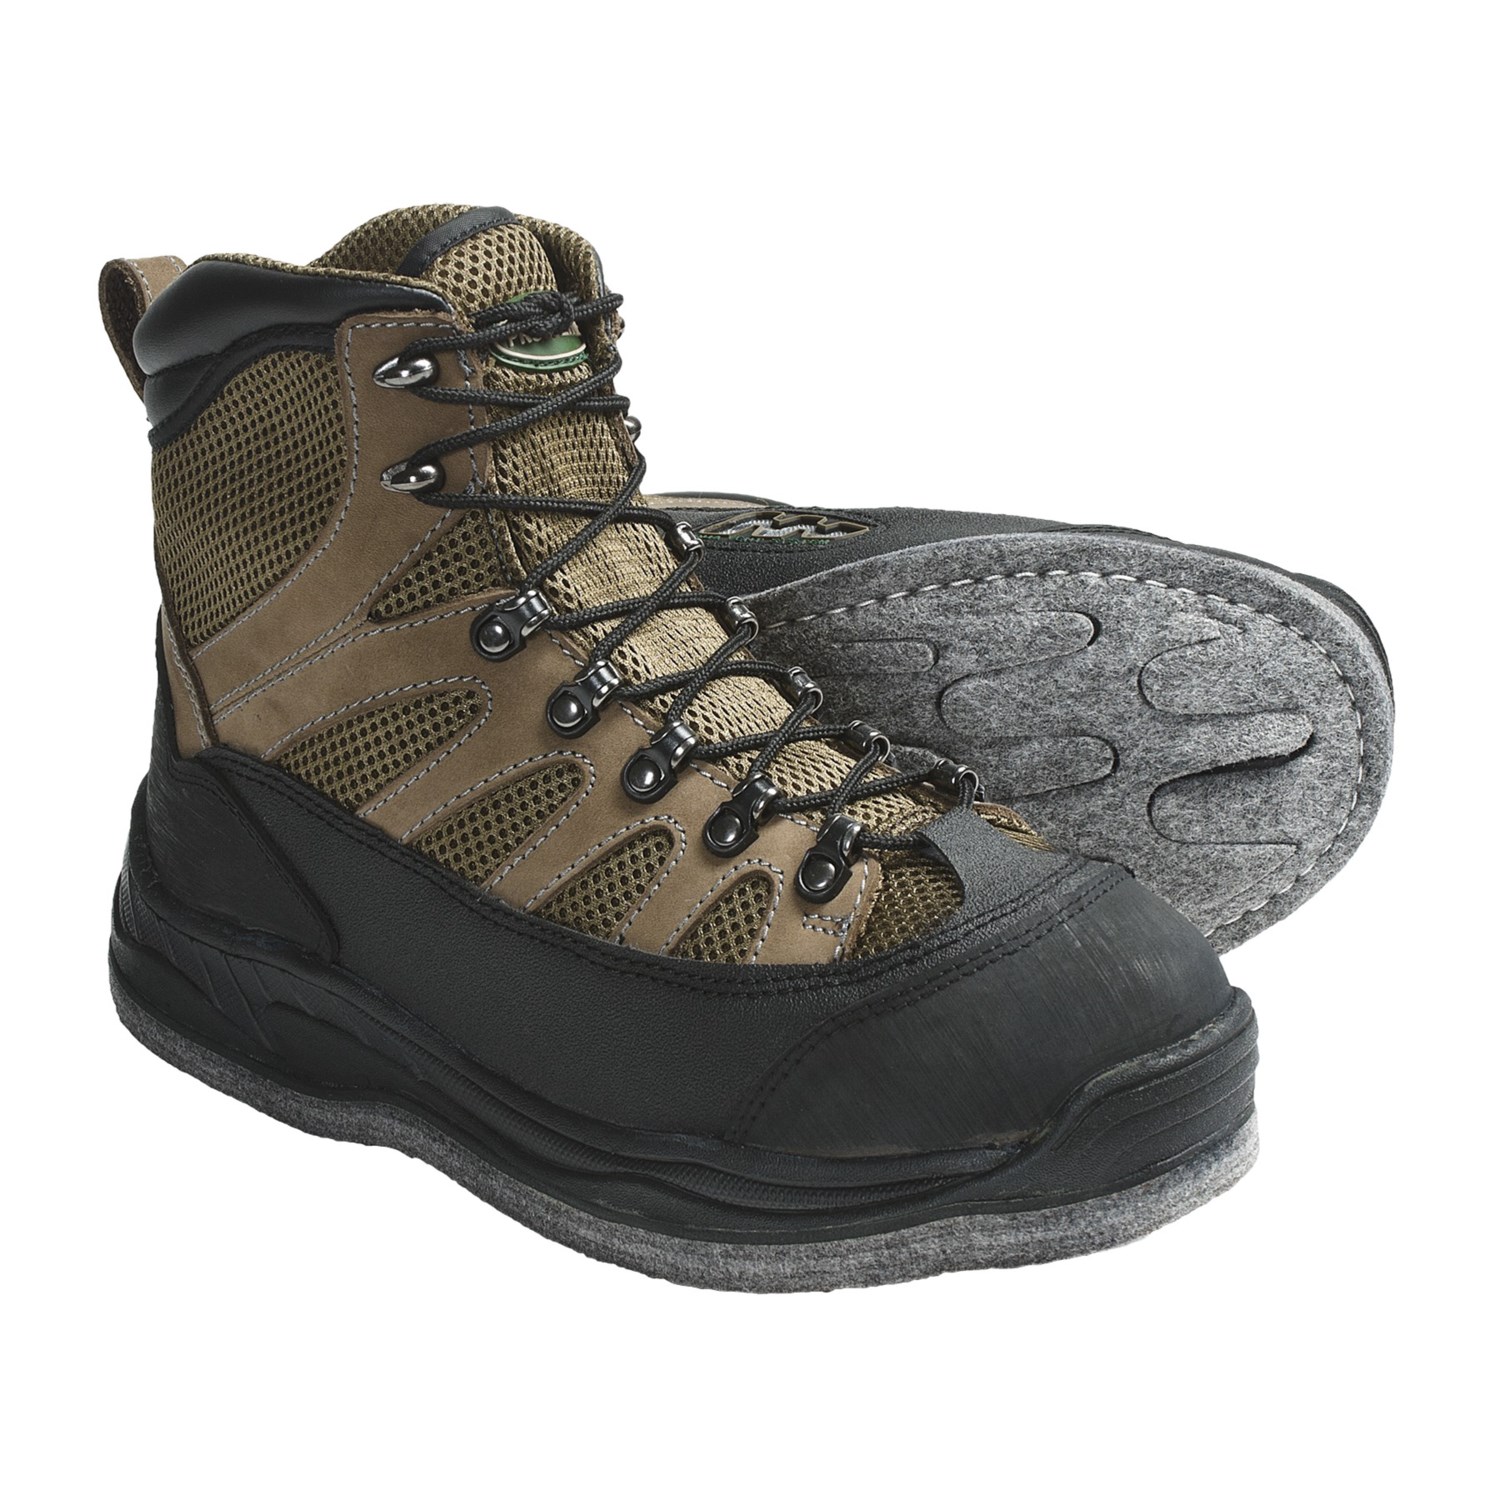 Pro Line Fox River Wading Boots - Felt Sole (For Men and Women) - Save 35%